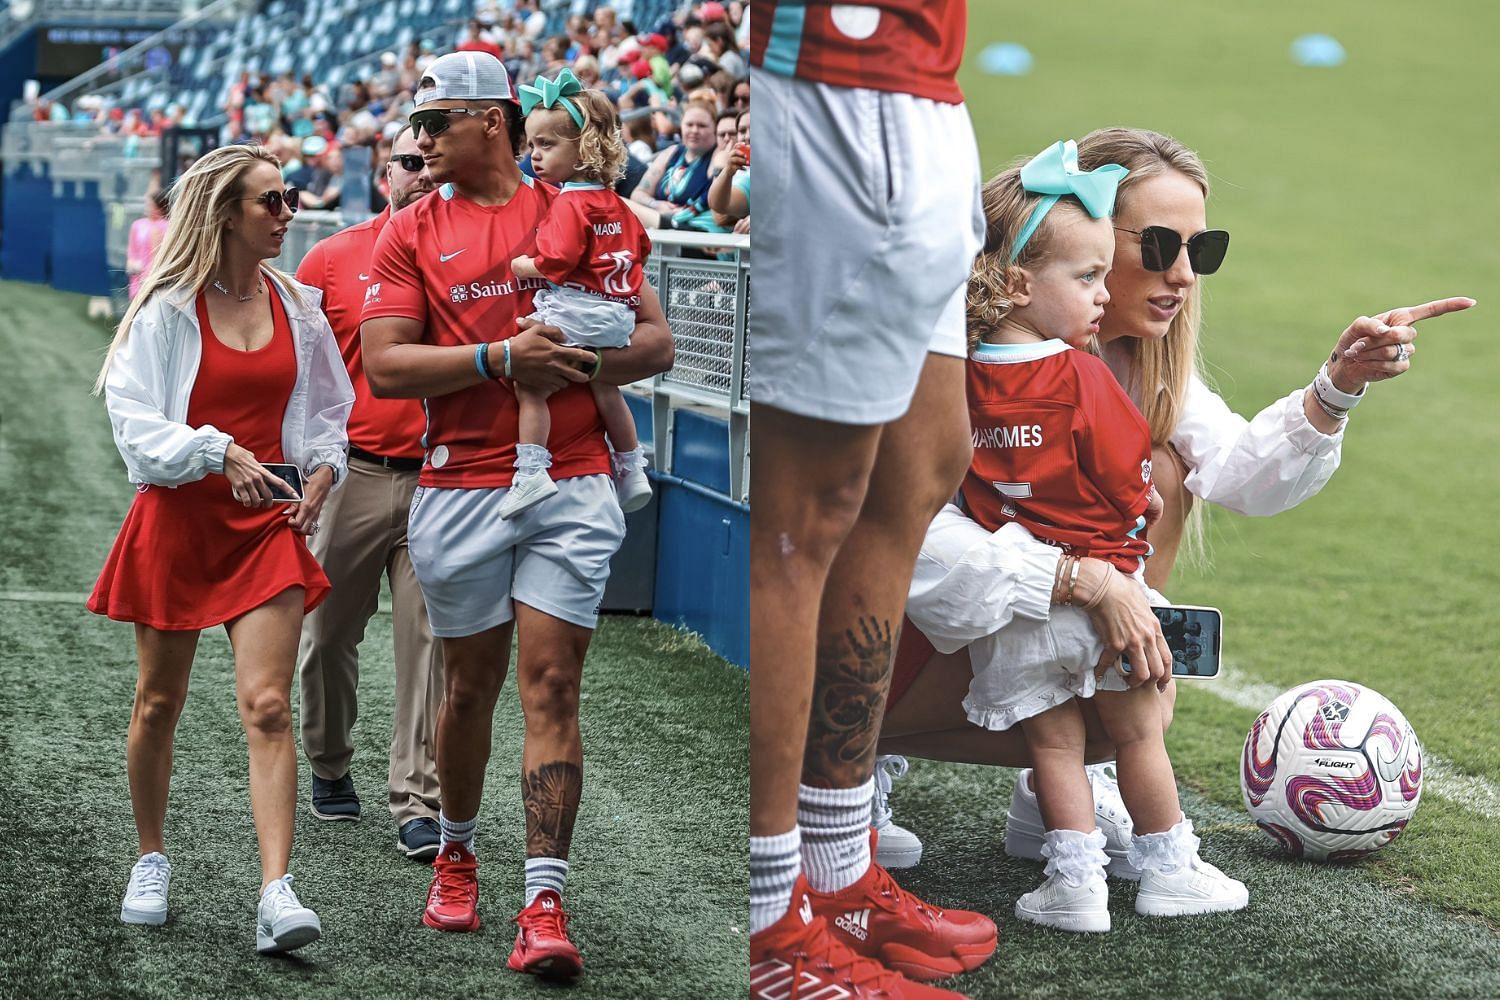 Patrick Mahomes and his family attending a Kansas City Current game (via the Current